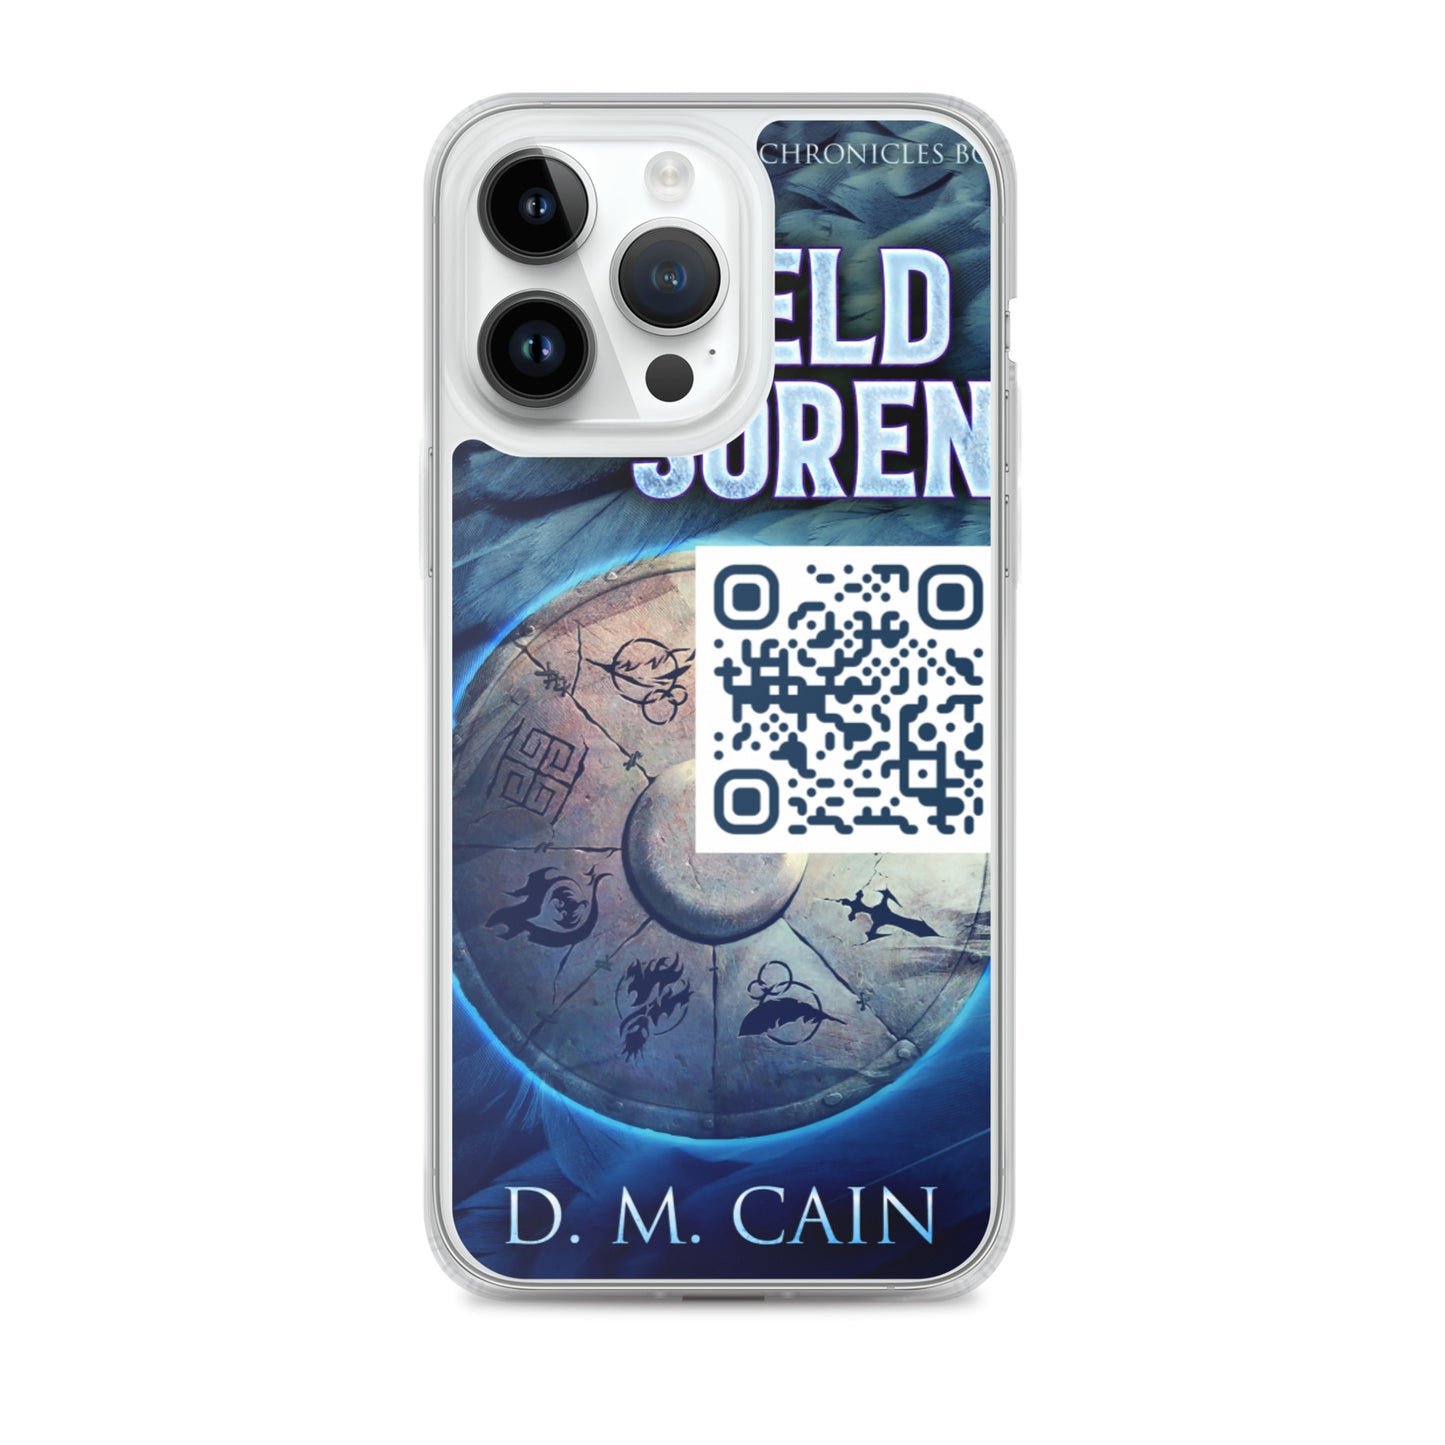 iphone case with cover art from D.M. Cain's book The Shield of Soren